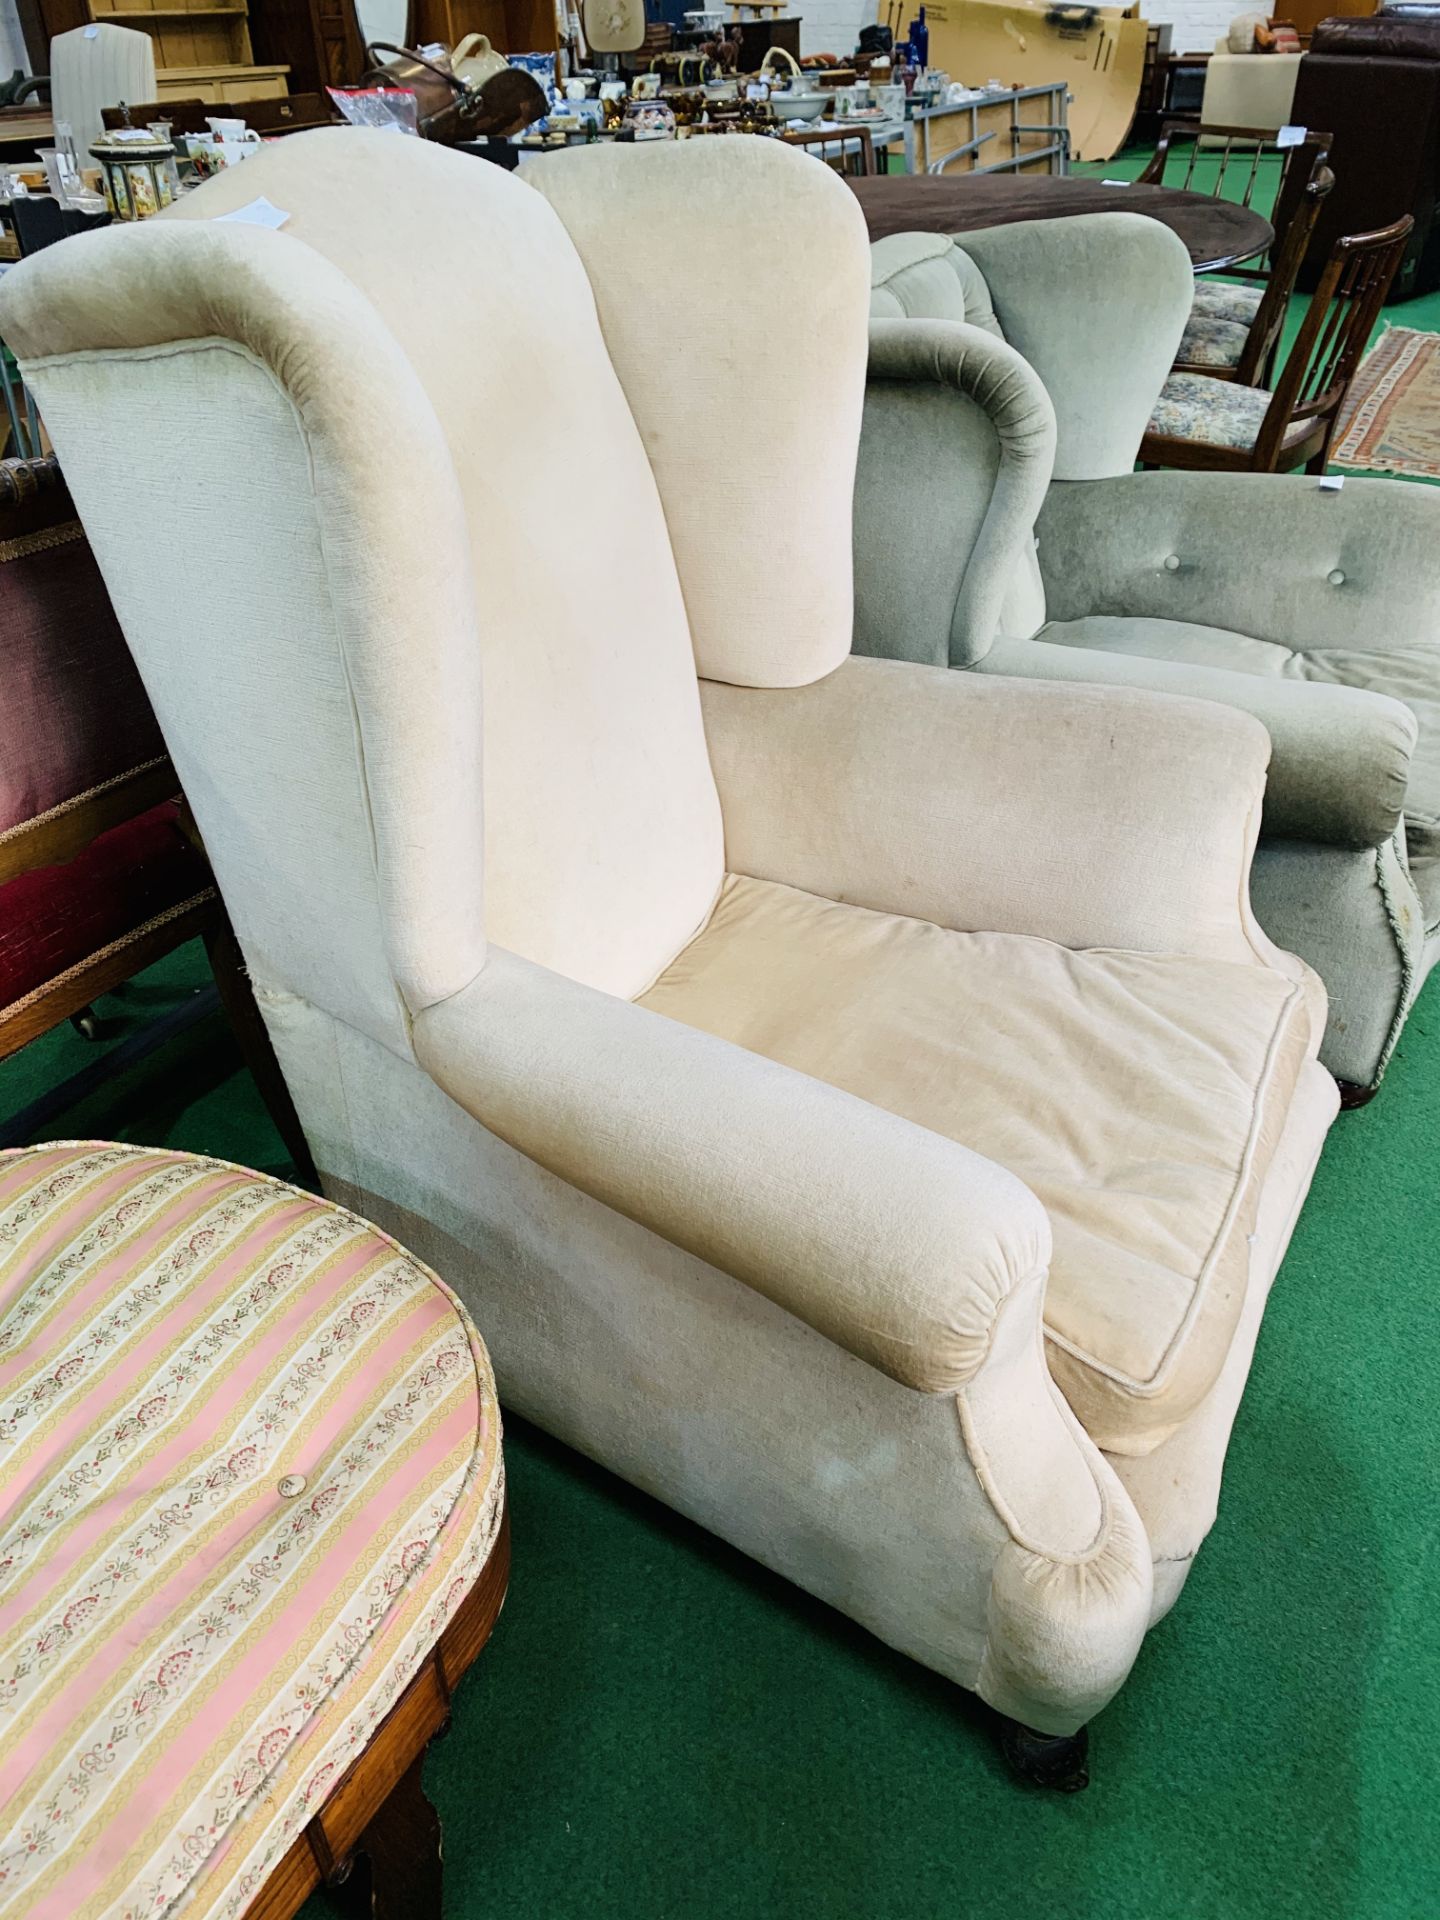 A beige upholstered Victorian armchair on casters, 92 x 90 x 110cms. - Image 2 of 2